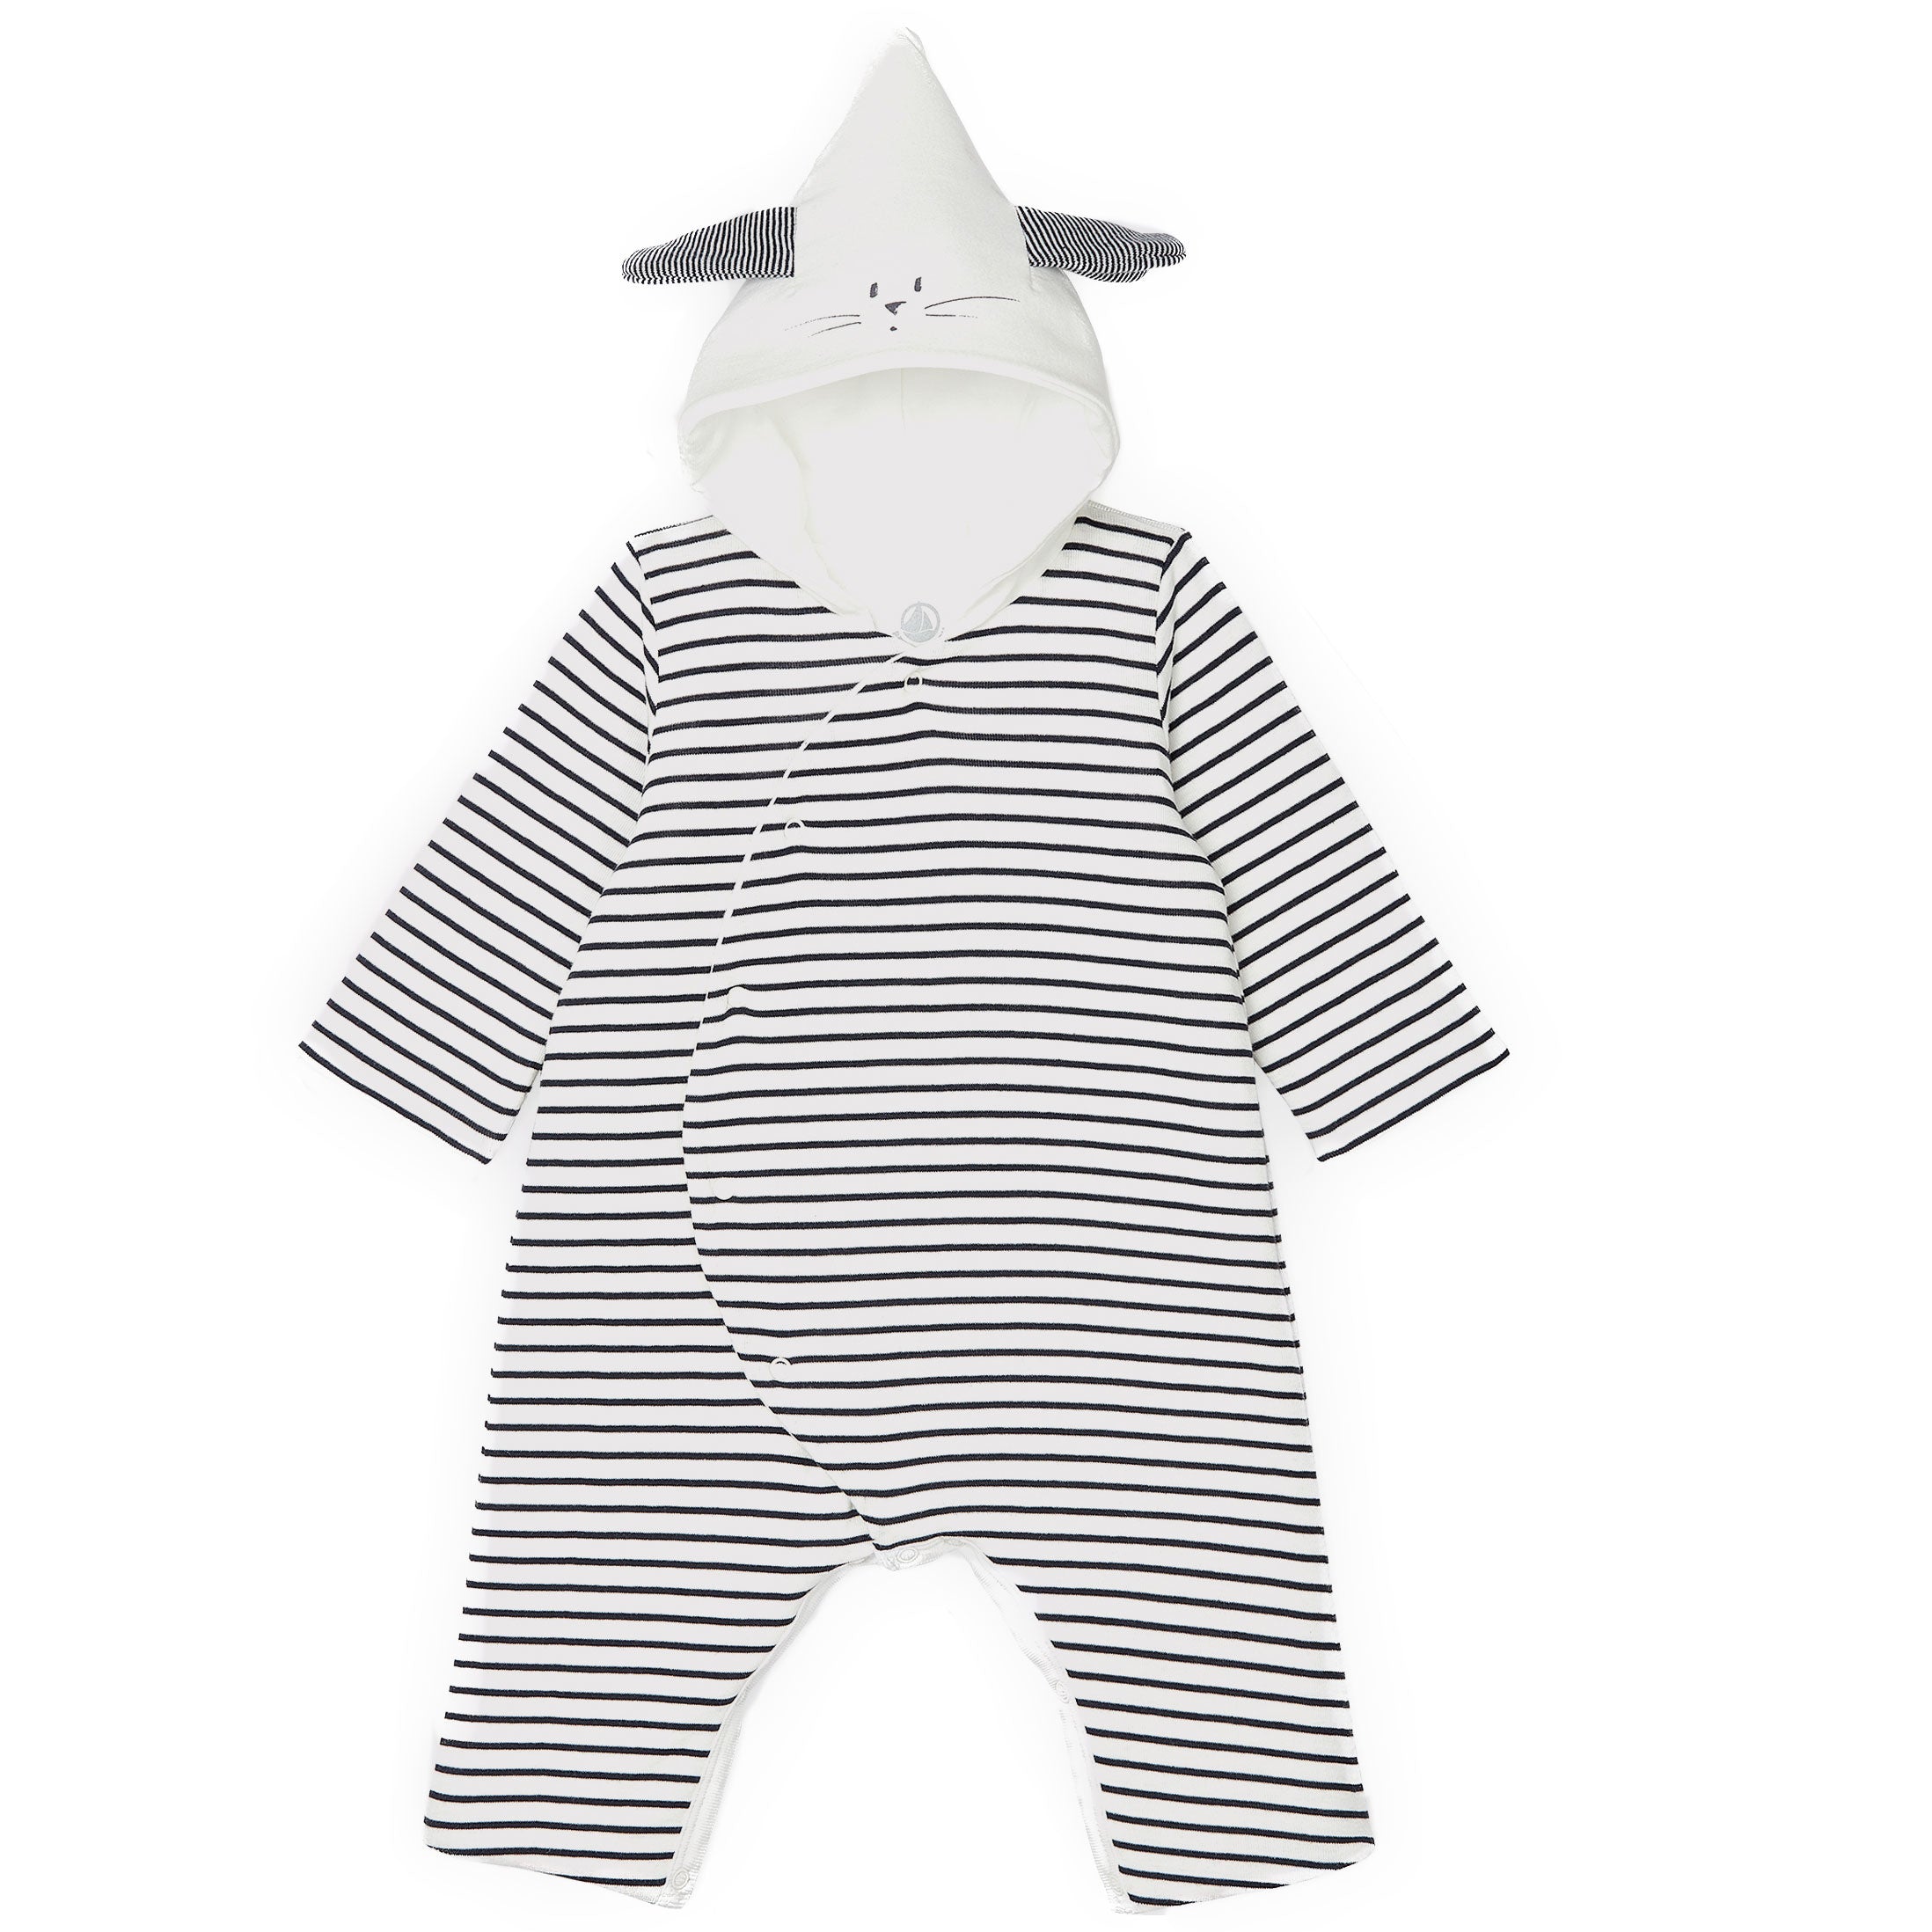 Best Baby Gifts by Petit Bateau – Bonjour Baby Baskets - Luxury Baby Gifts